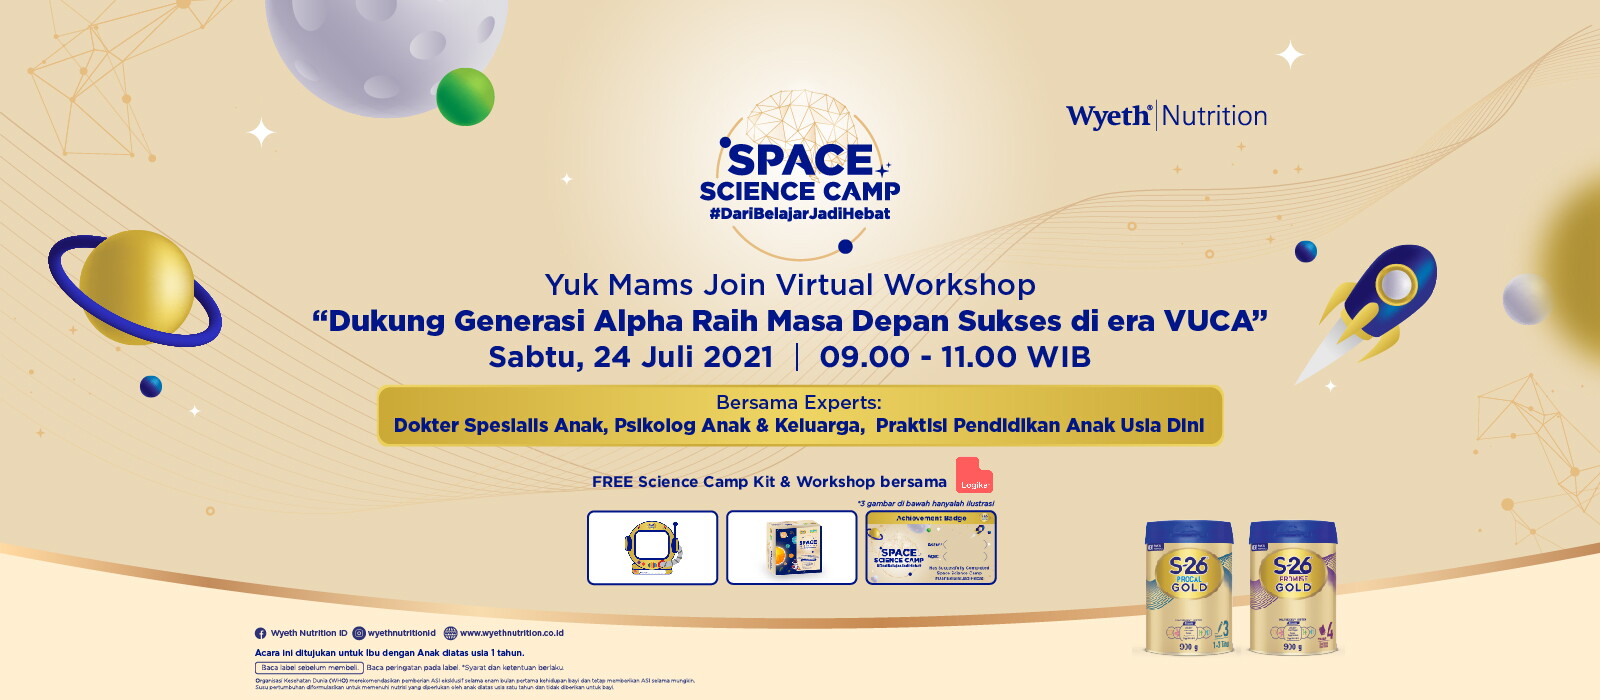 SPACE SCIENCE CAMP 